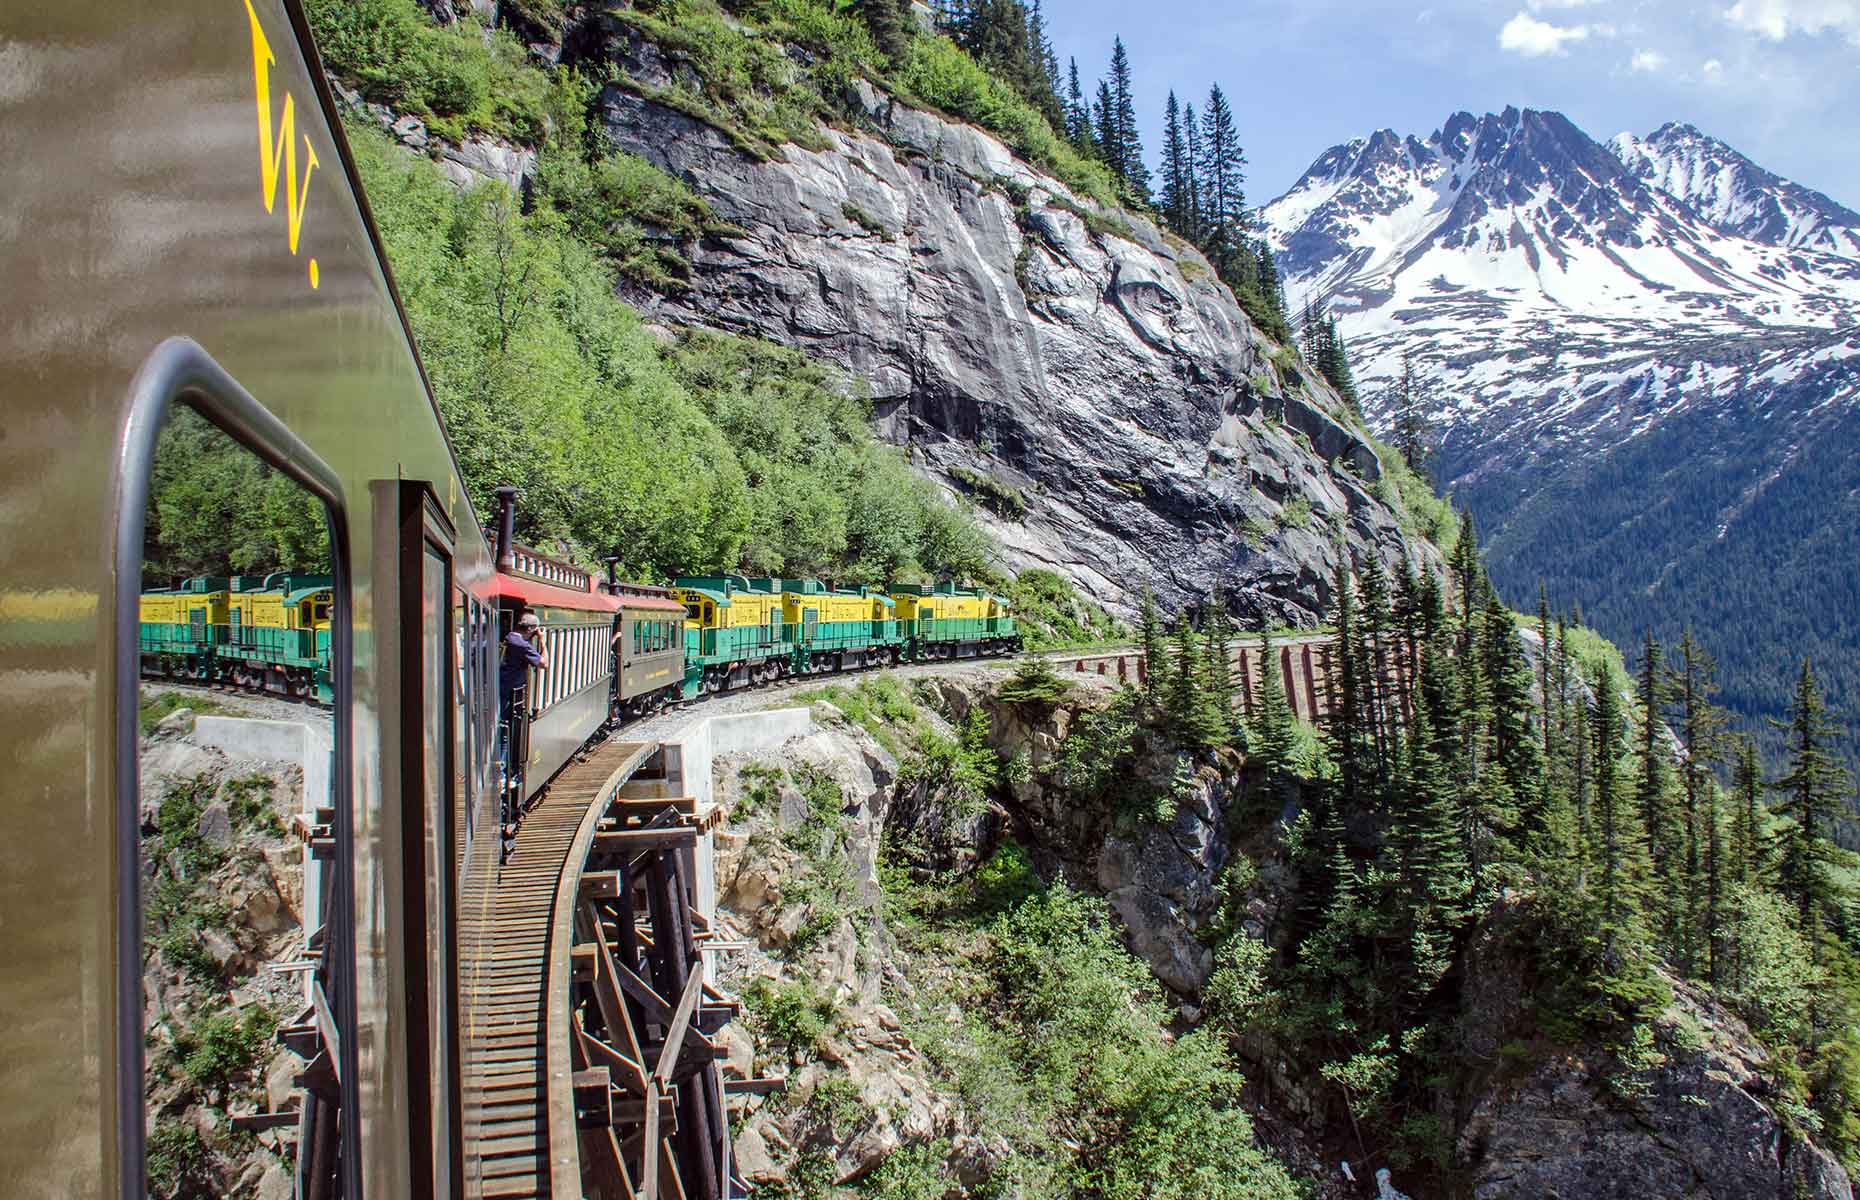 White Pass and Yukon Route Railroad (Image: Rocky Grimes/Shutterstock)